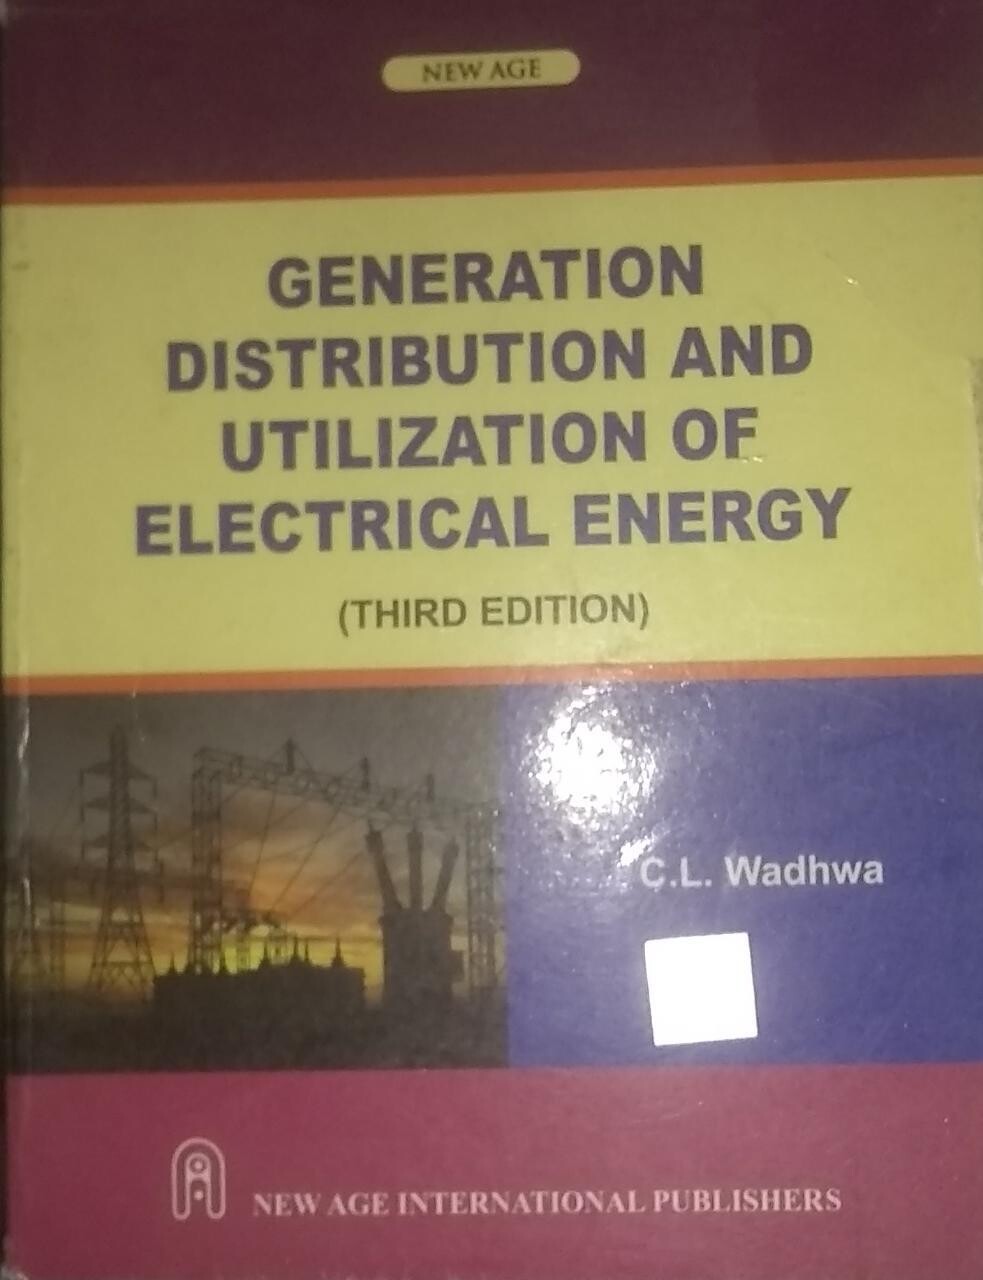 Generation Distribution and Utilization of Electrical Energy by C L Wadhwa